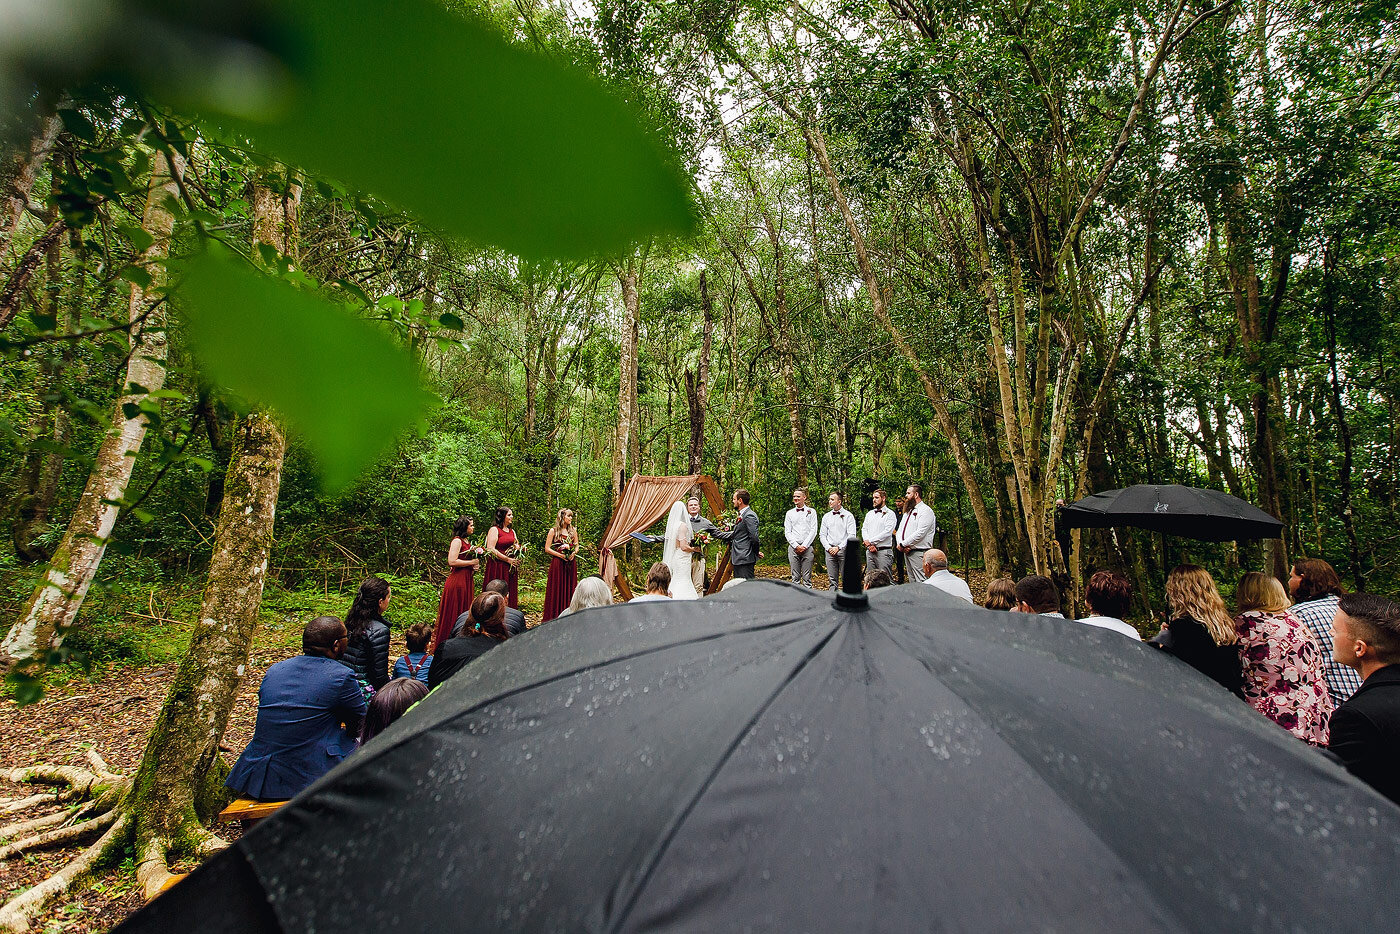 Rain and umbrellas during a forest wedding in the garden route.